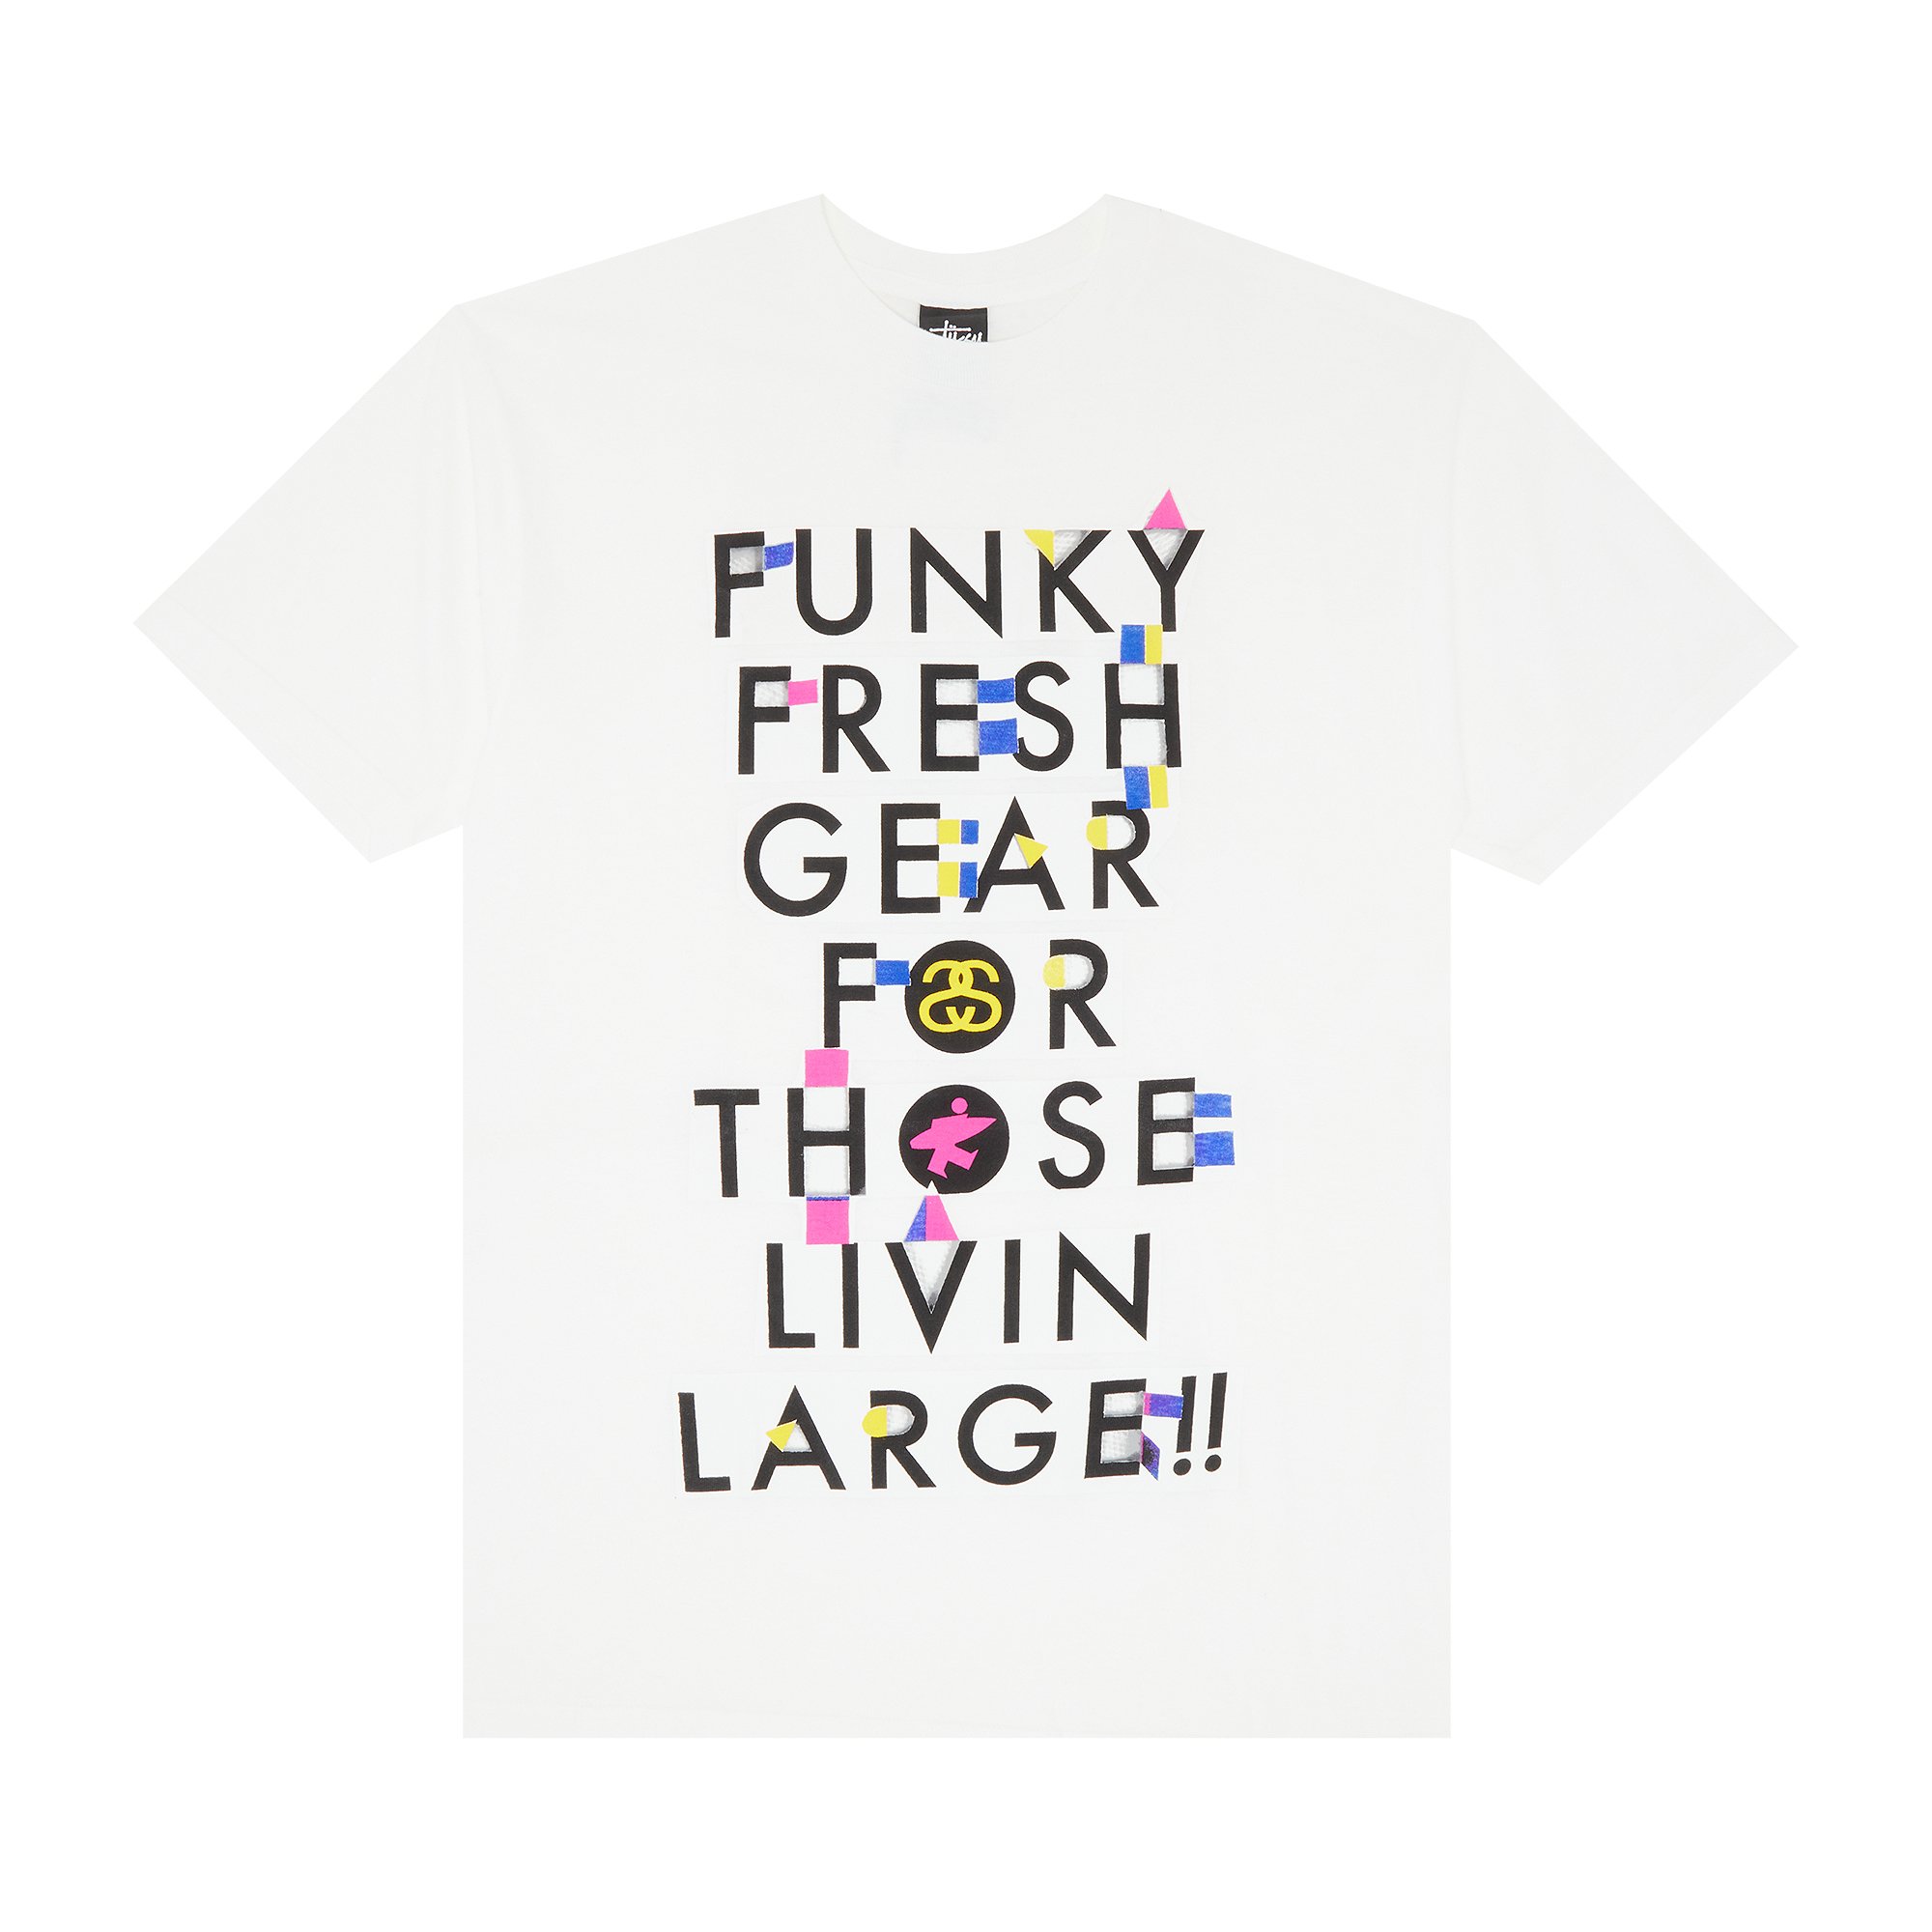 Buy Stussy Funky Fresh Gear For Those Livin Large!! Tee 'White 